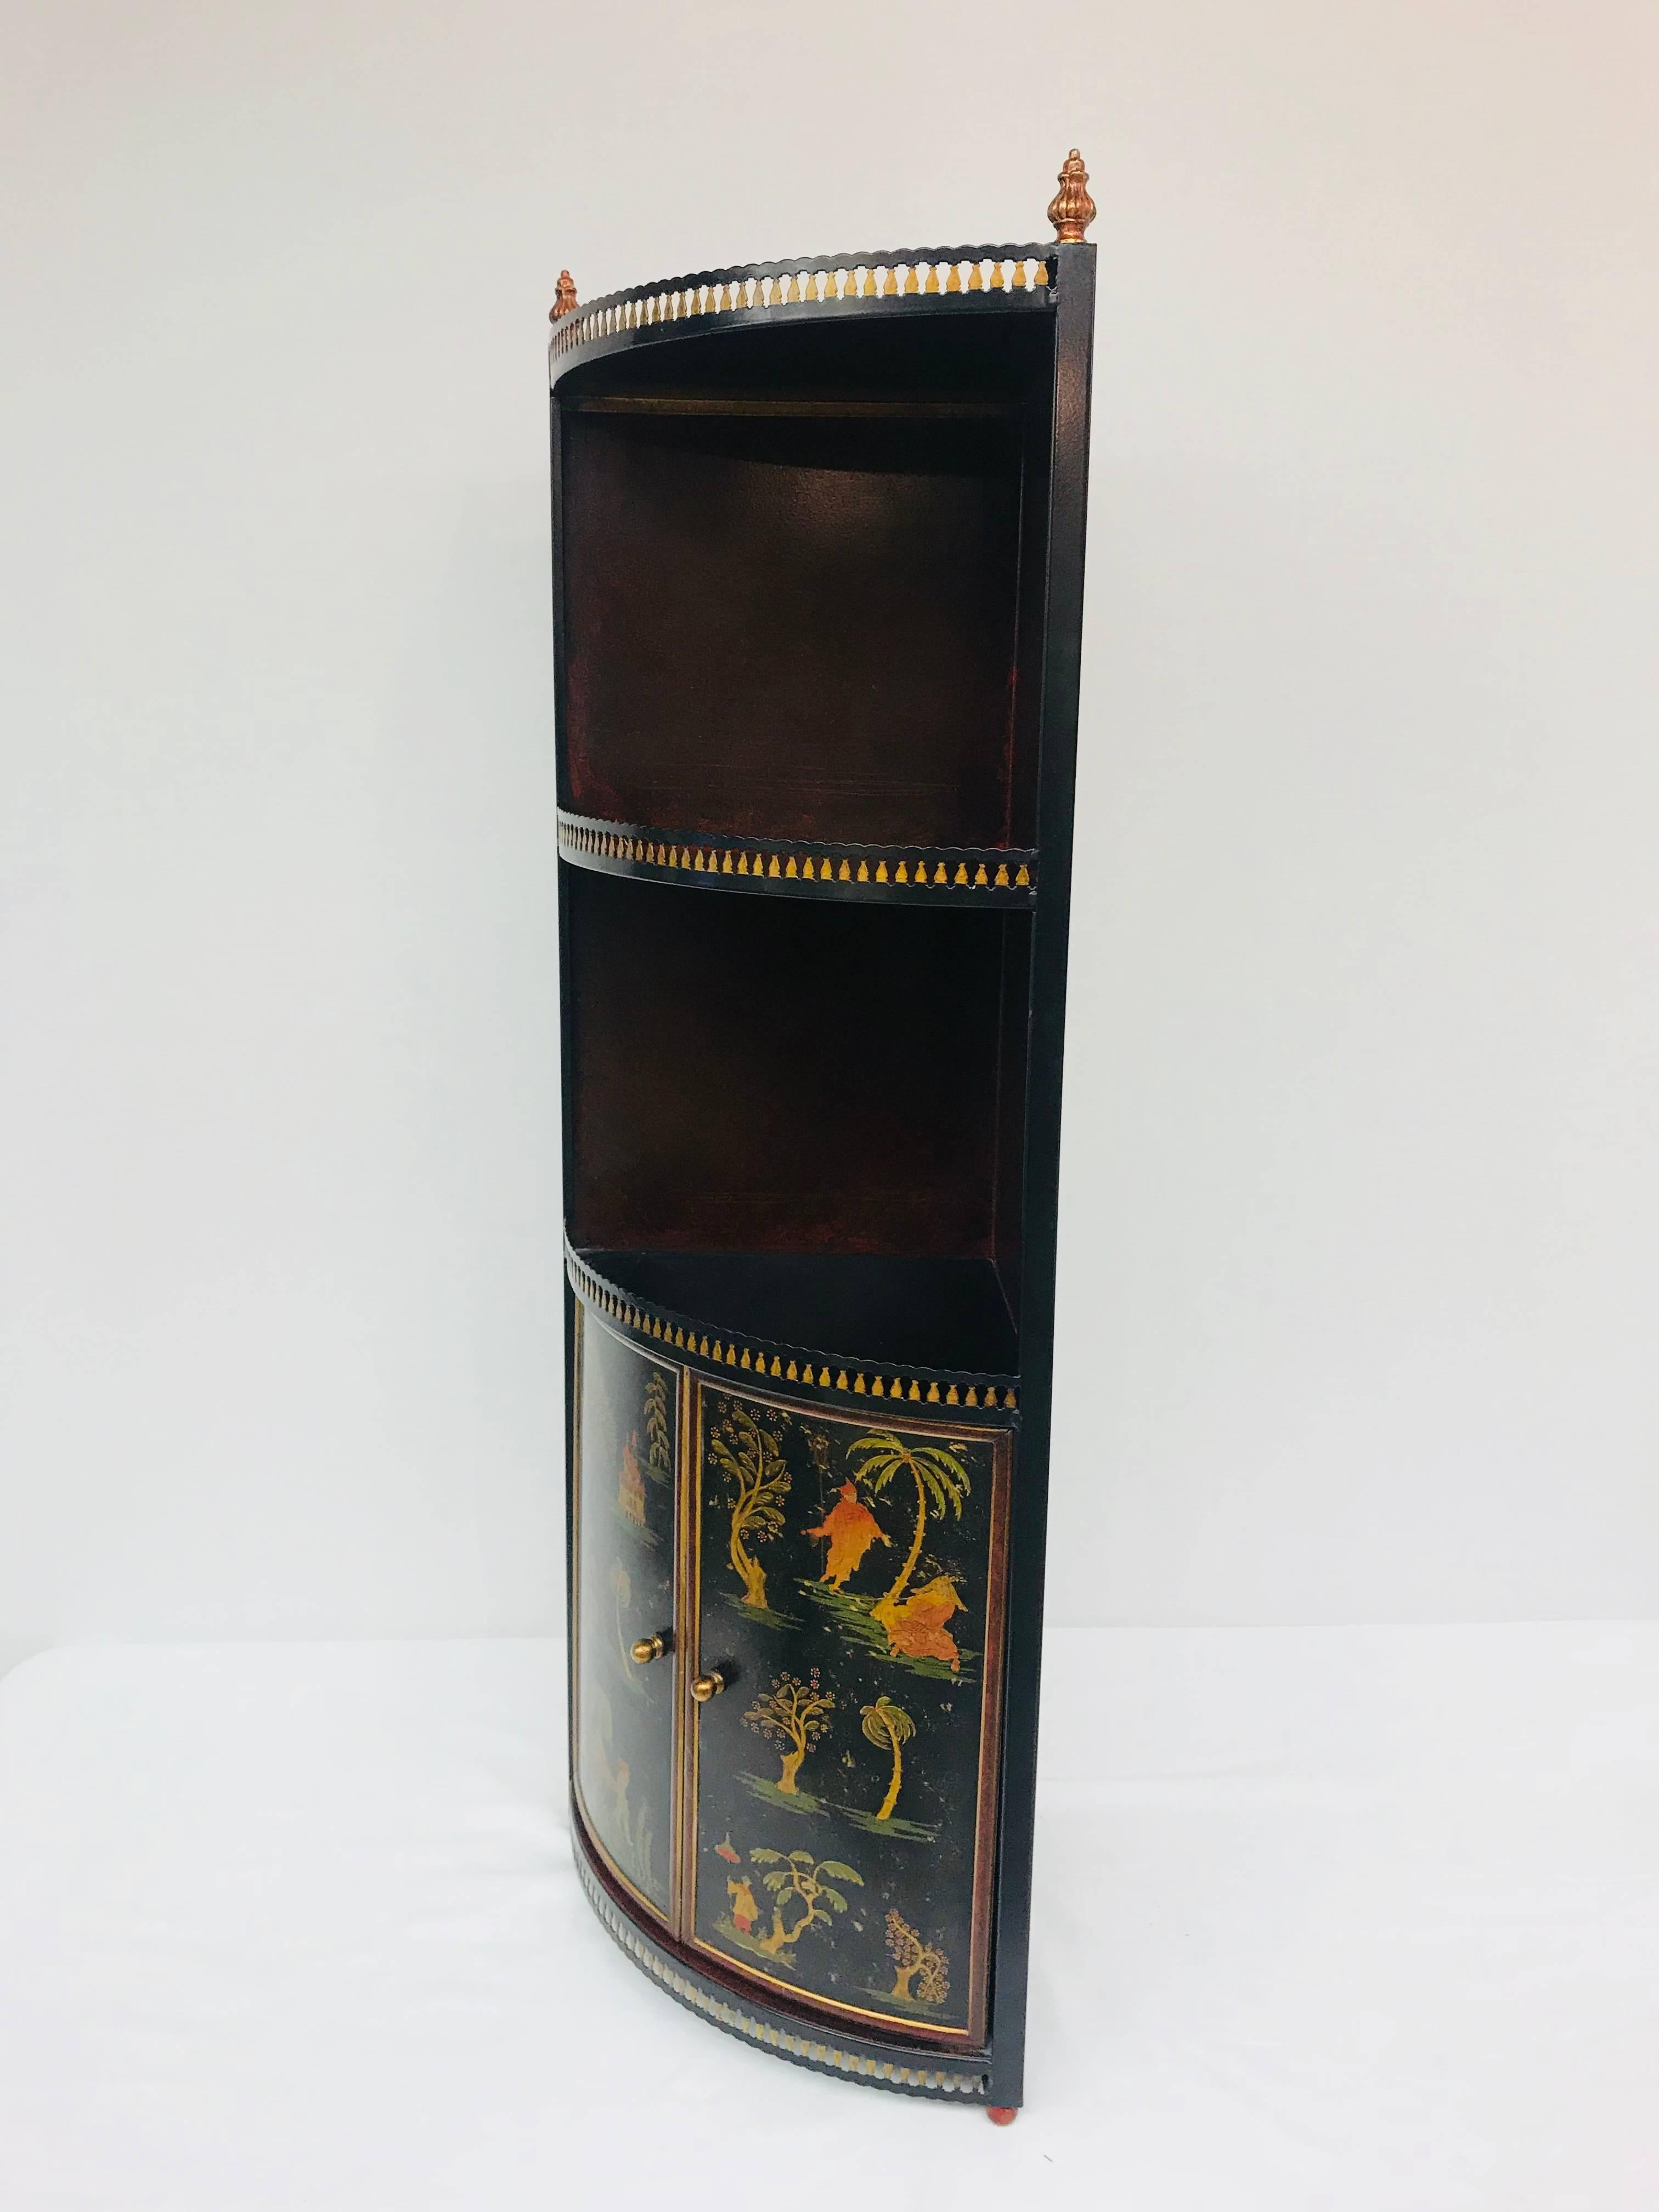 Straight from Italy, circa 1960, this tole corner cabinet features a charming chinoiserie scene. Two open shelves provide display space for a variety of small objects, while the two cabinet doors open to reveal a 15